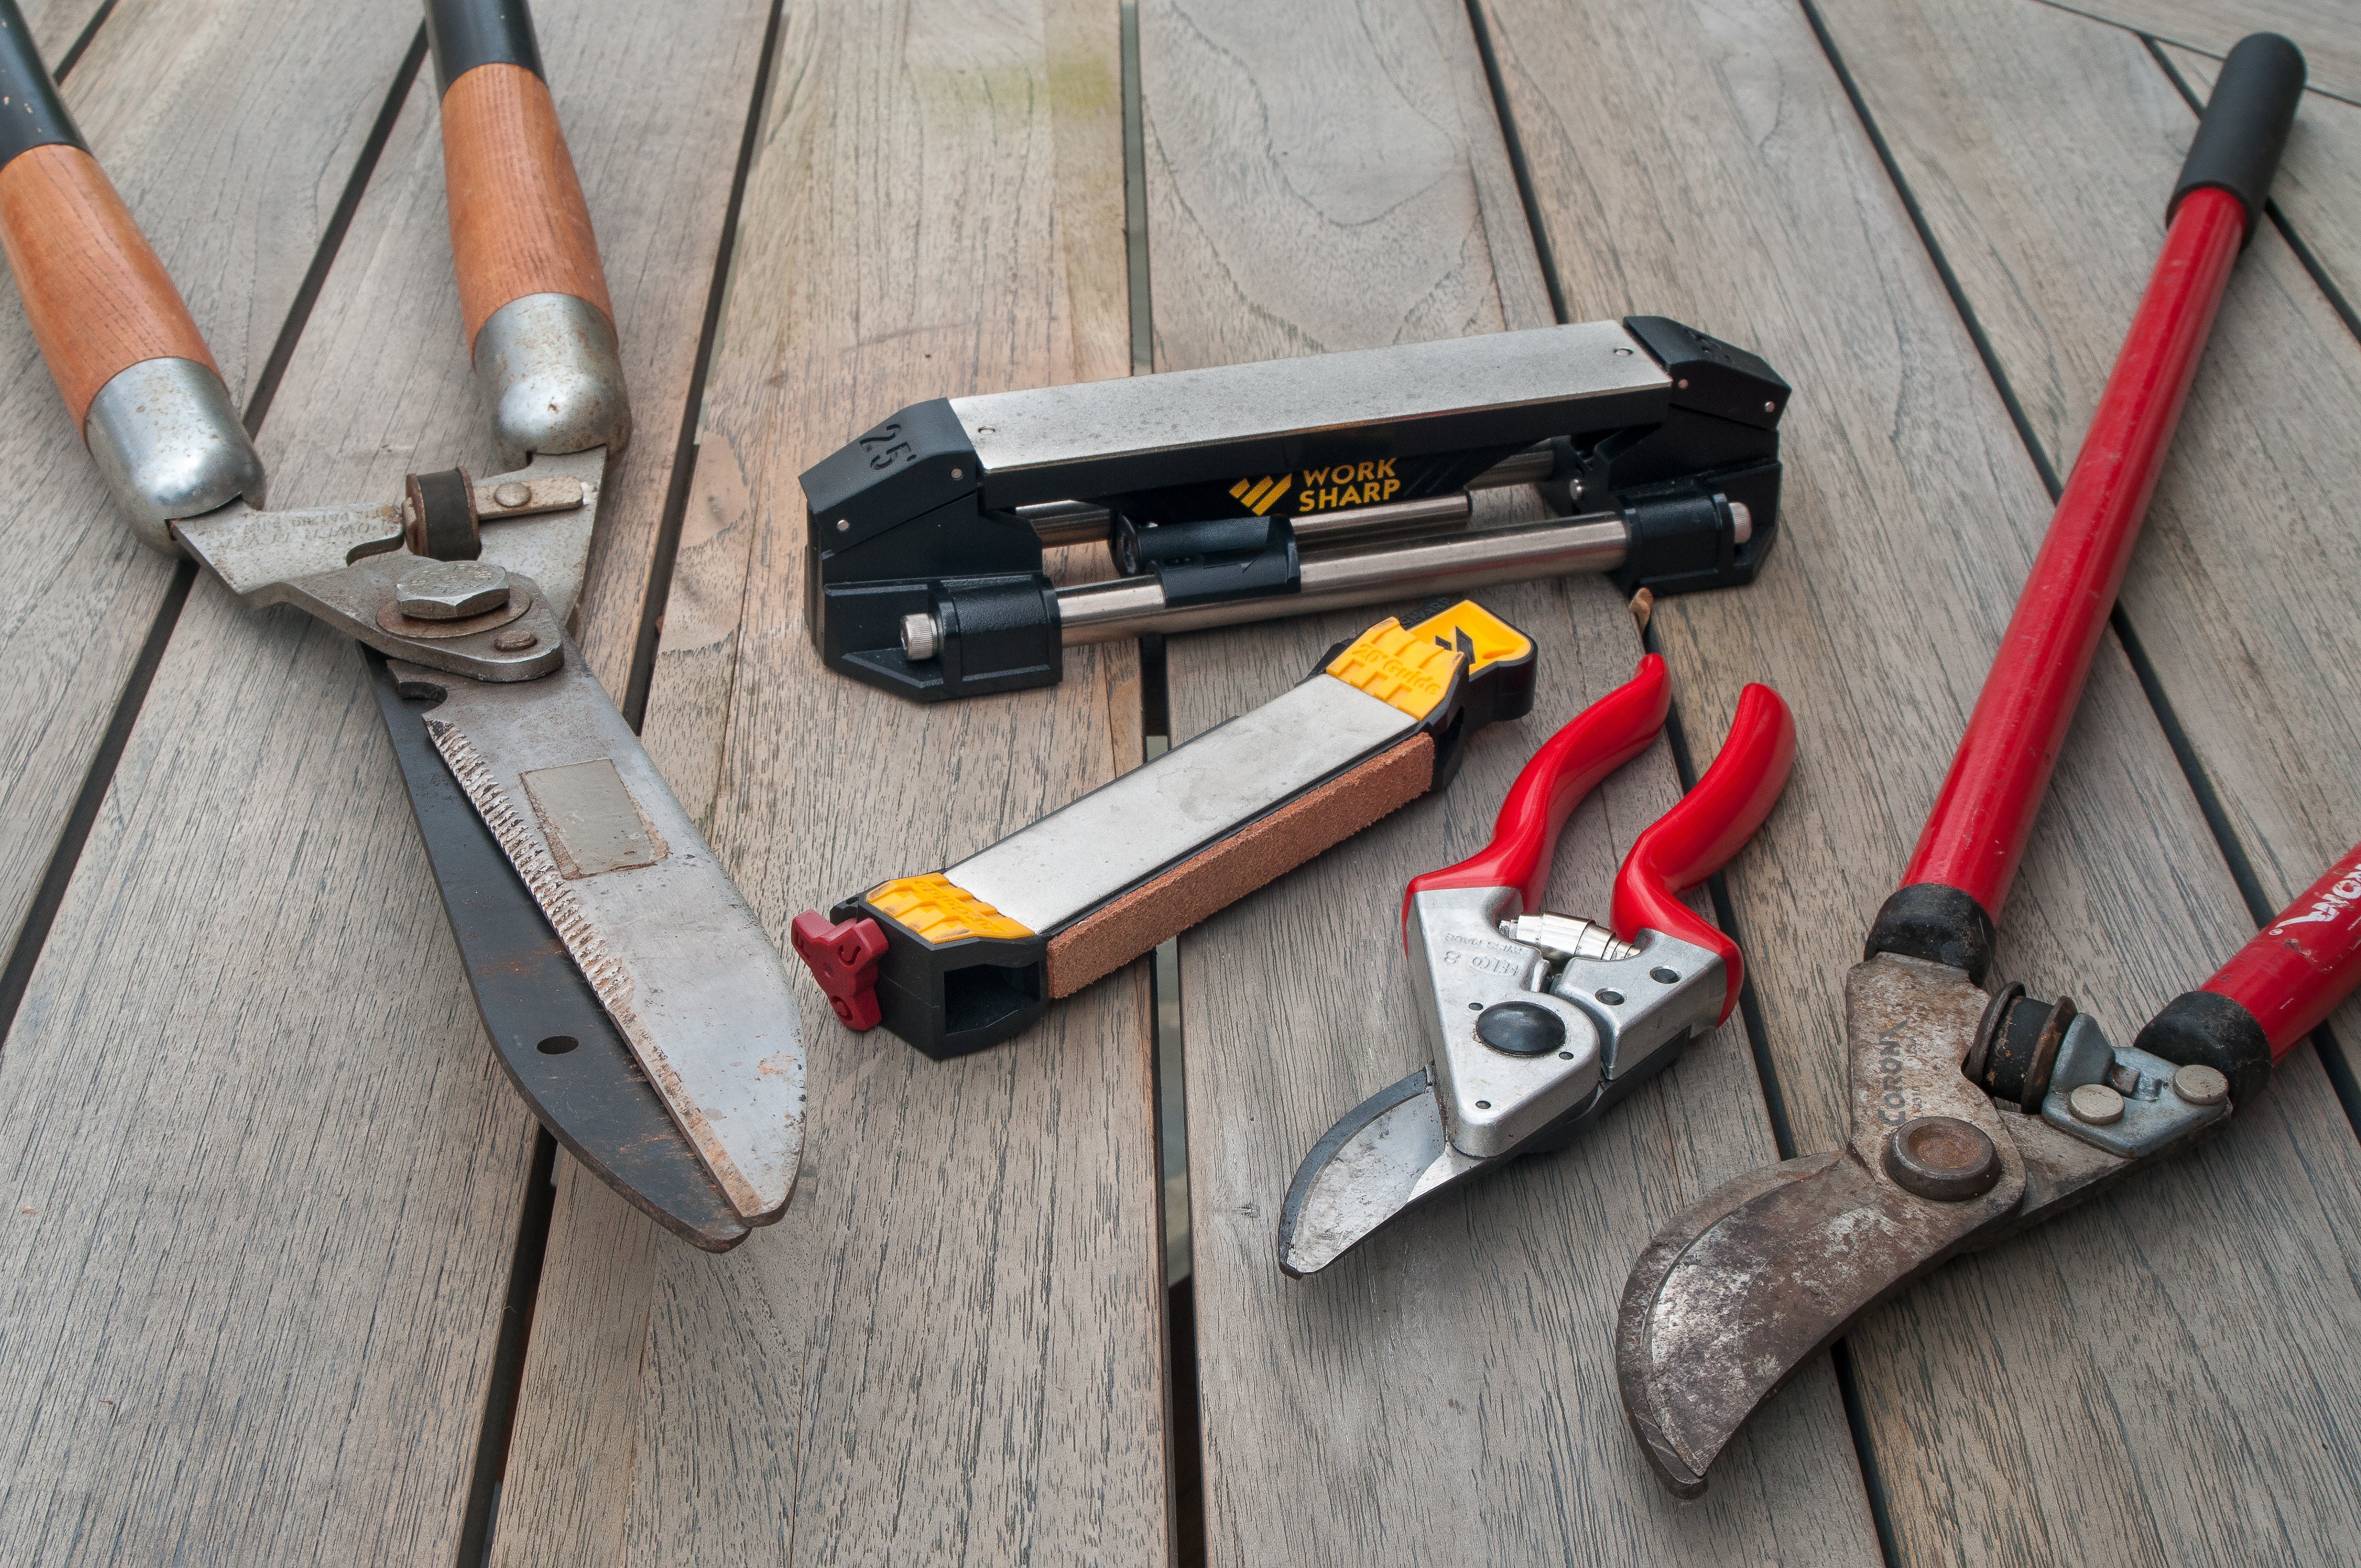 Sharpening Your Lawn & Garden Tools